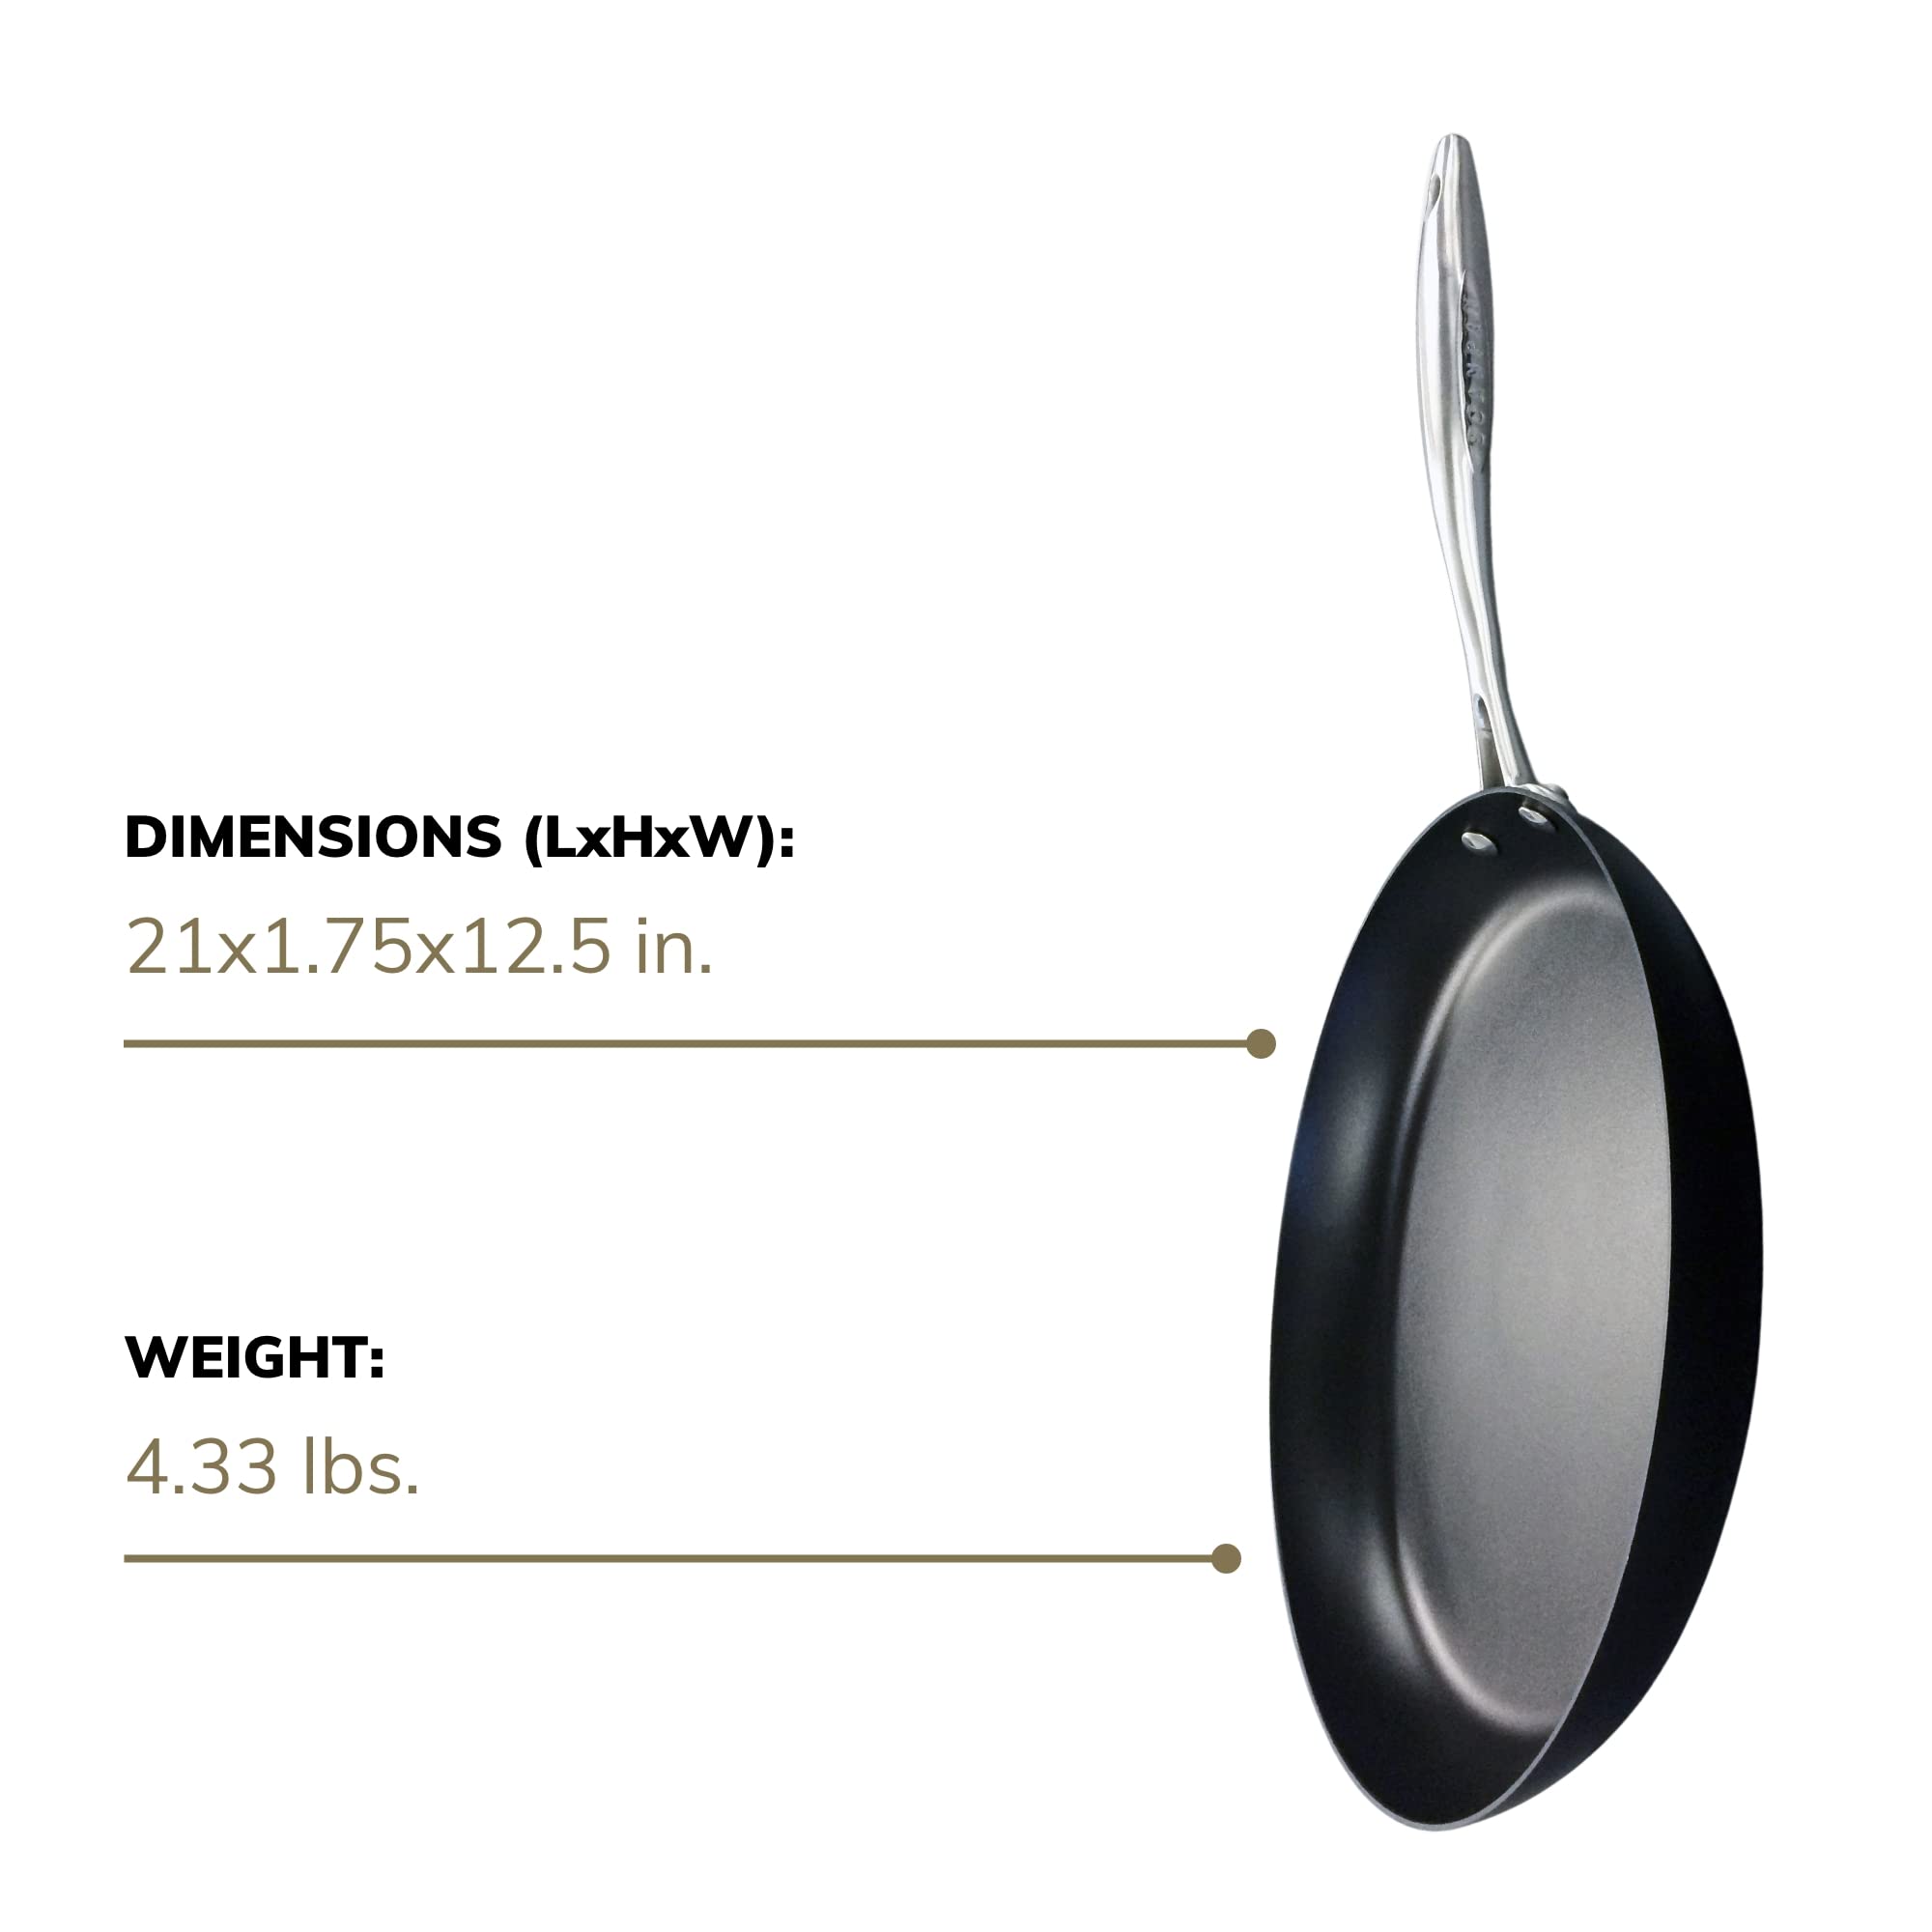 SCANPAN Professional 12.5” Fry Pan - Easy-to-Use Nonstick Cookware - Dishwasher, Metal Utensil & Oven Safe - Made in Denmark